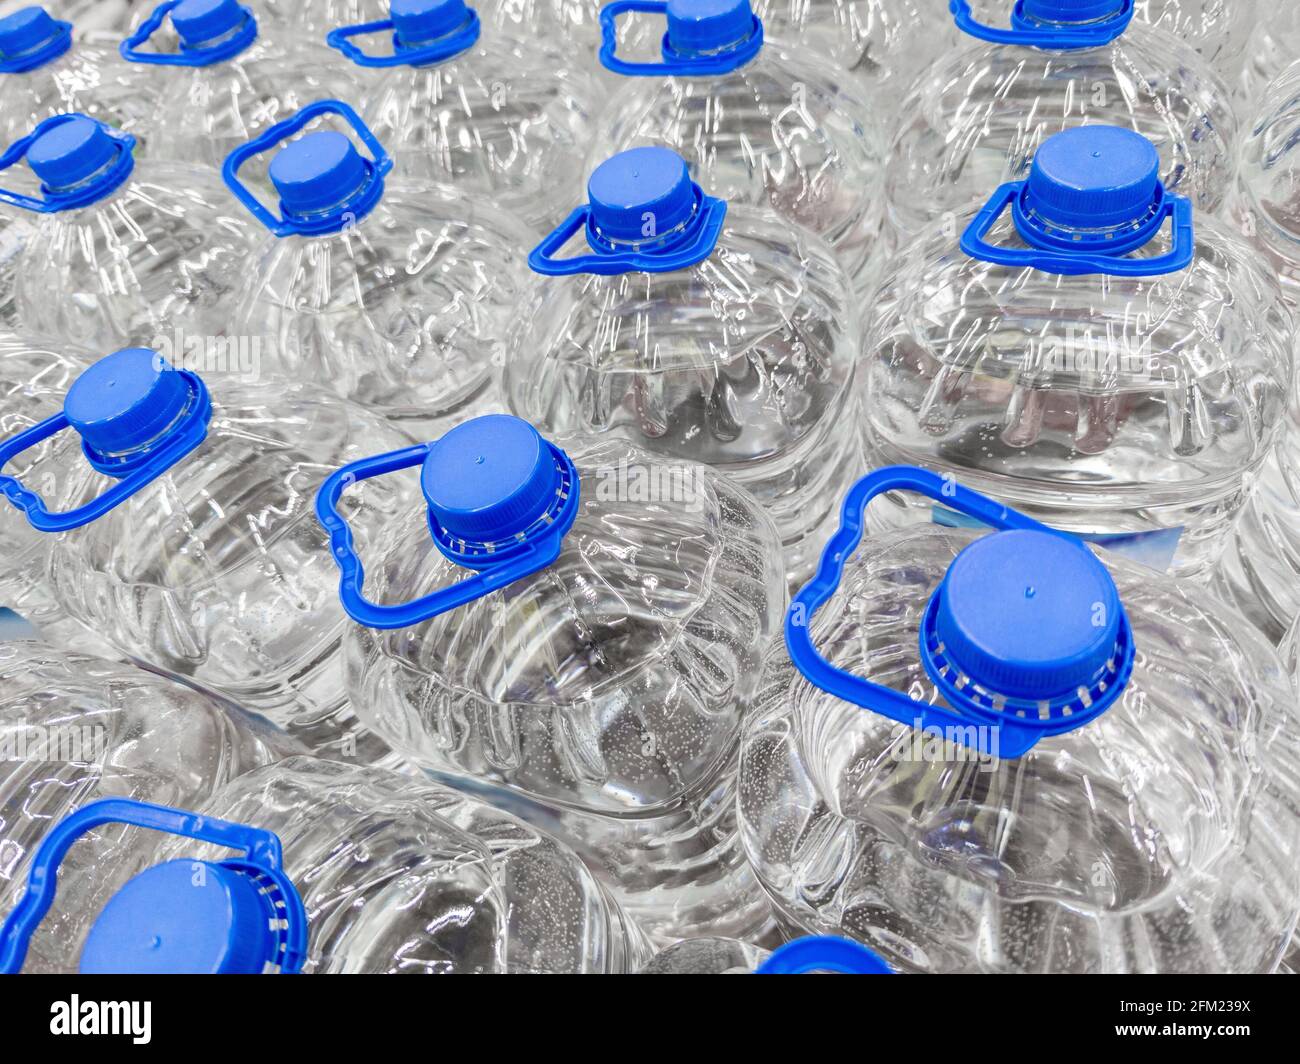 full frame background of transparent plastic 5 liter bottles of clear water supplies Stock Photo